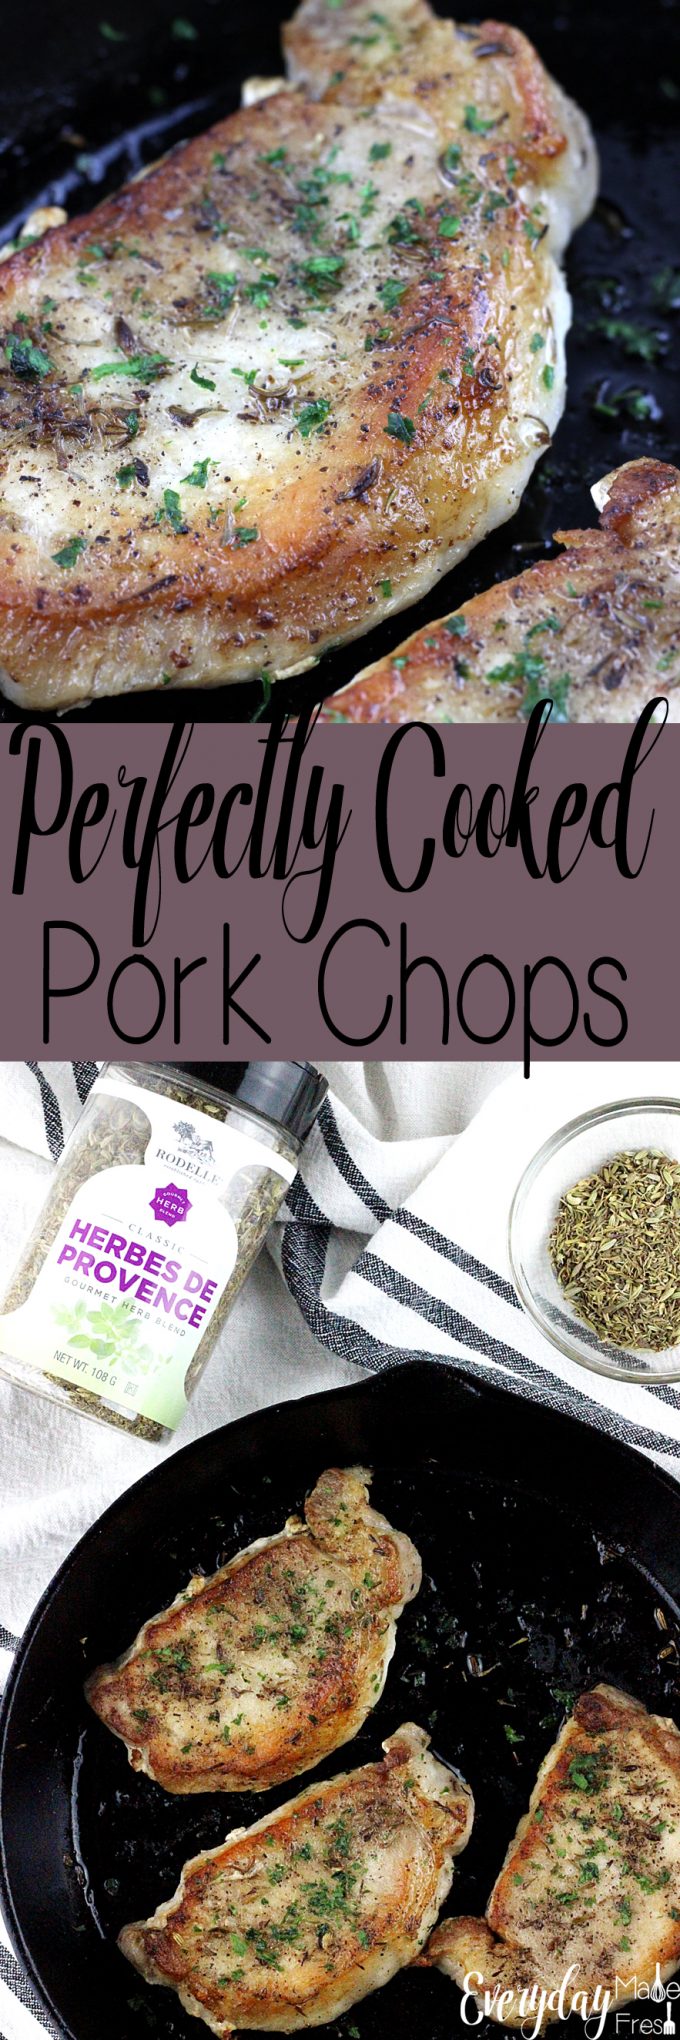 Overcooking pork chops is a thing of the past with this recipe for Perfectly Cooked Pork Chops. These are tender, juicy, and perfect every time! | EverydayMadeFresh.com